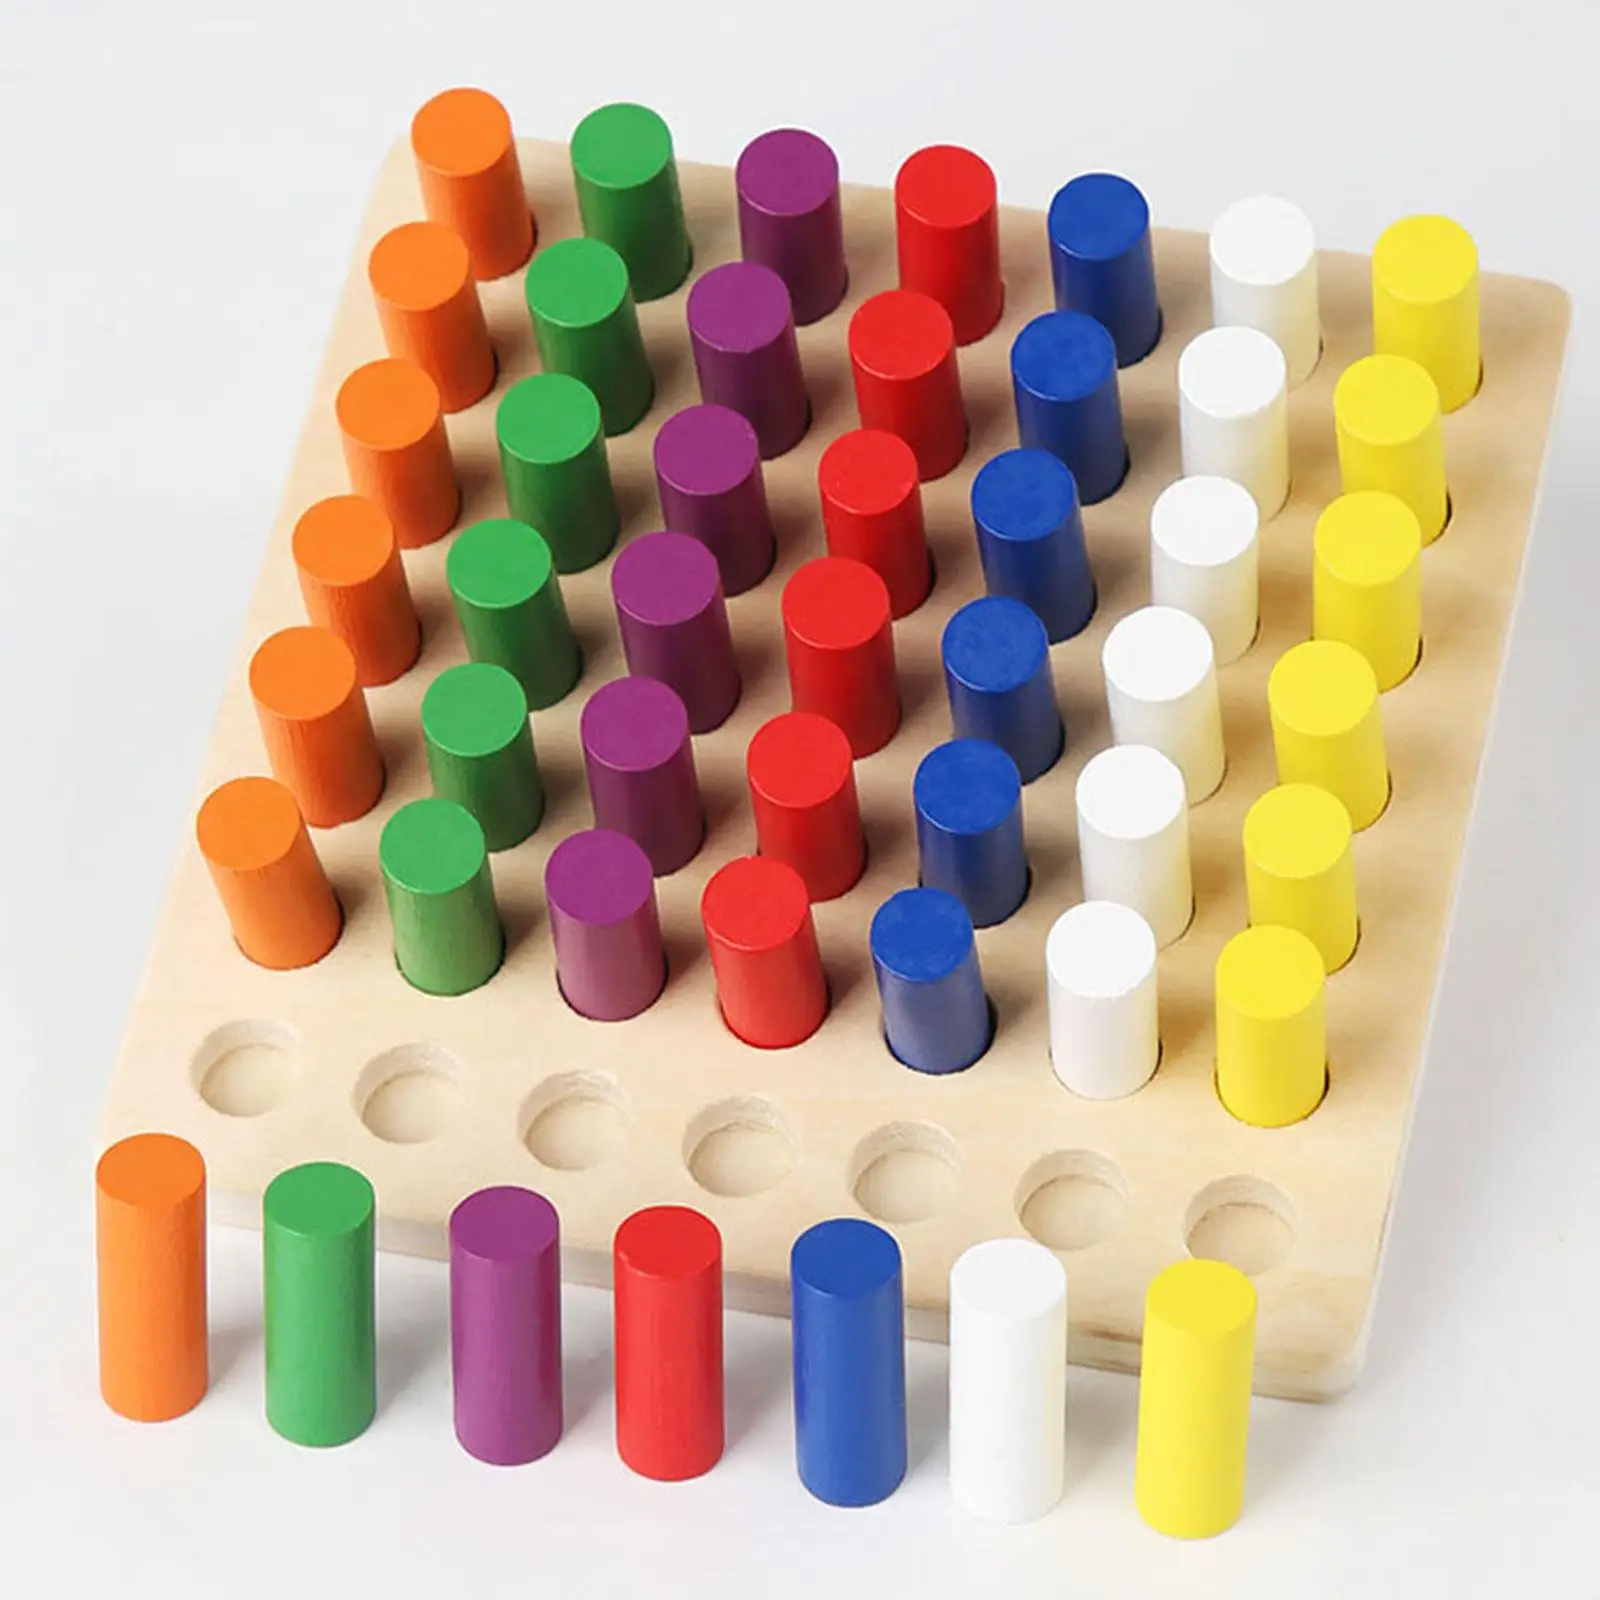 Wooden Counting Rods Borad Mathematical Math Toy Number Counting Sticks Inserting Blocks for Children Toddler Kids Baby Gifts